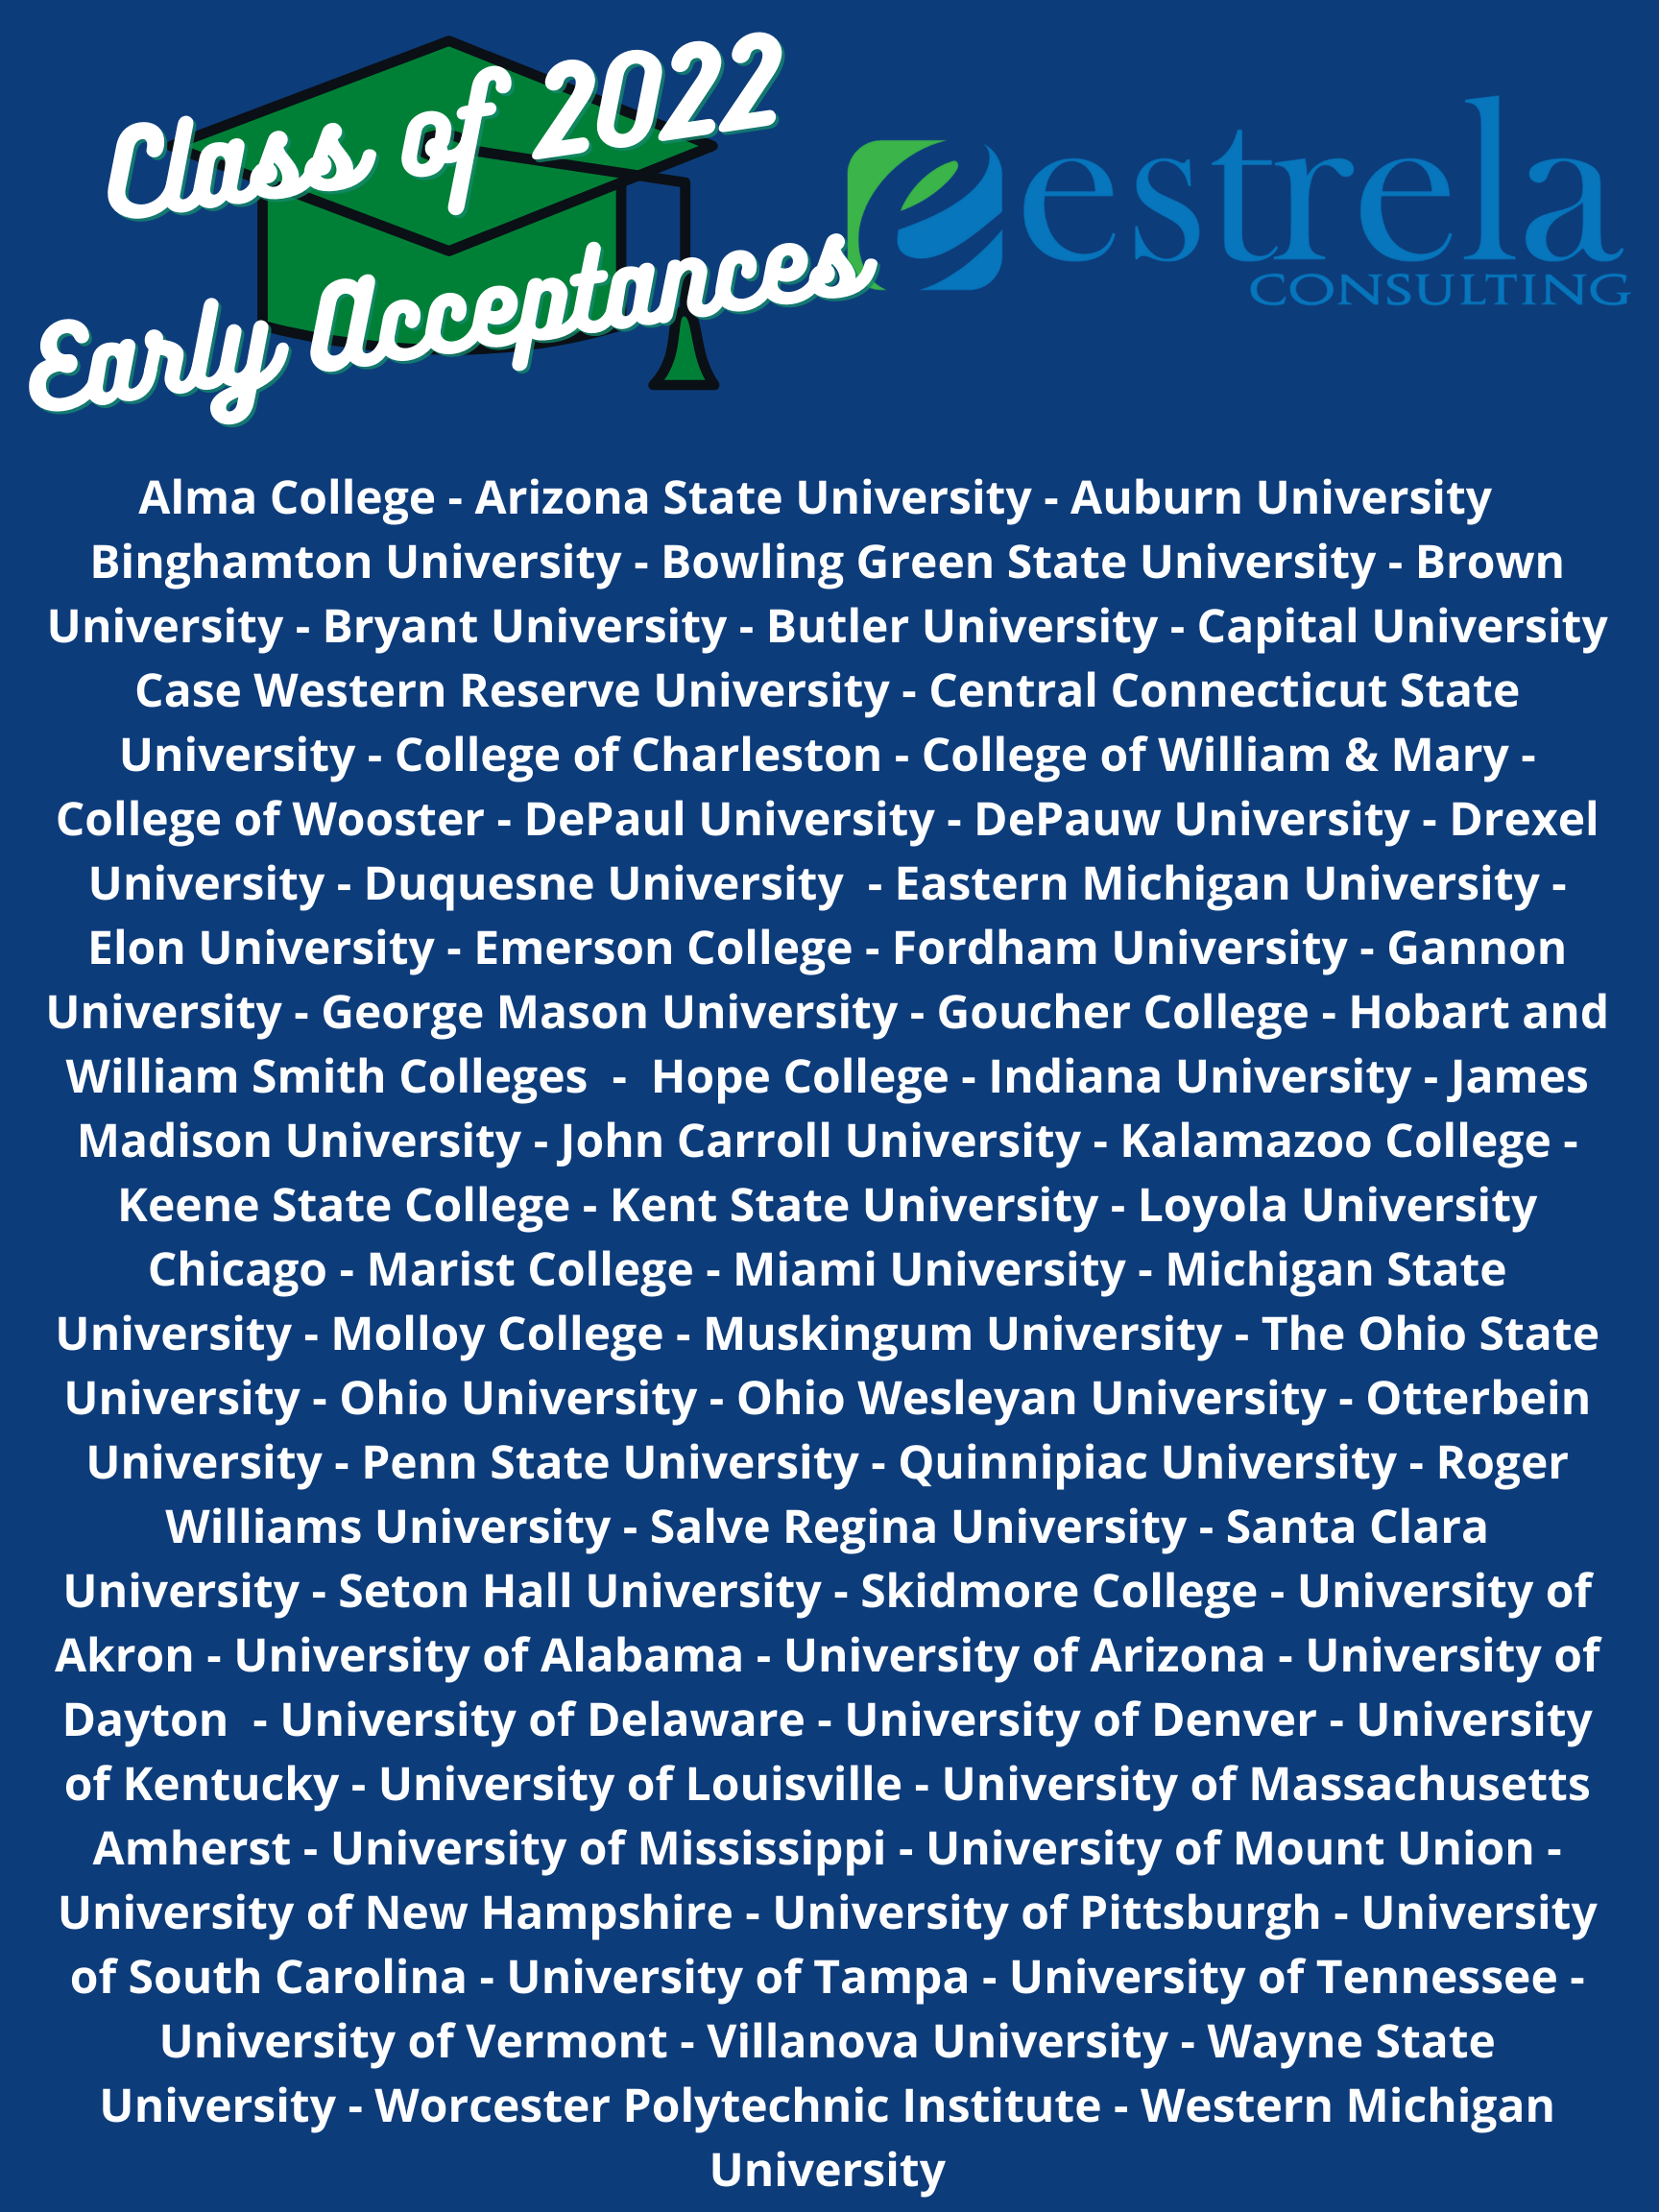 Class of 2022 Early Acceptances